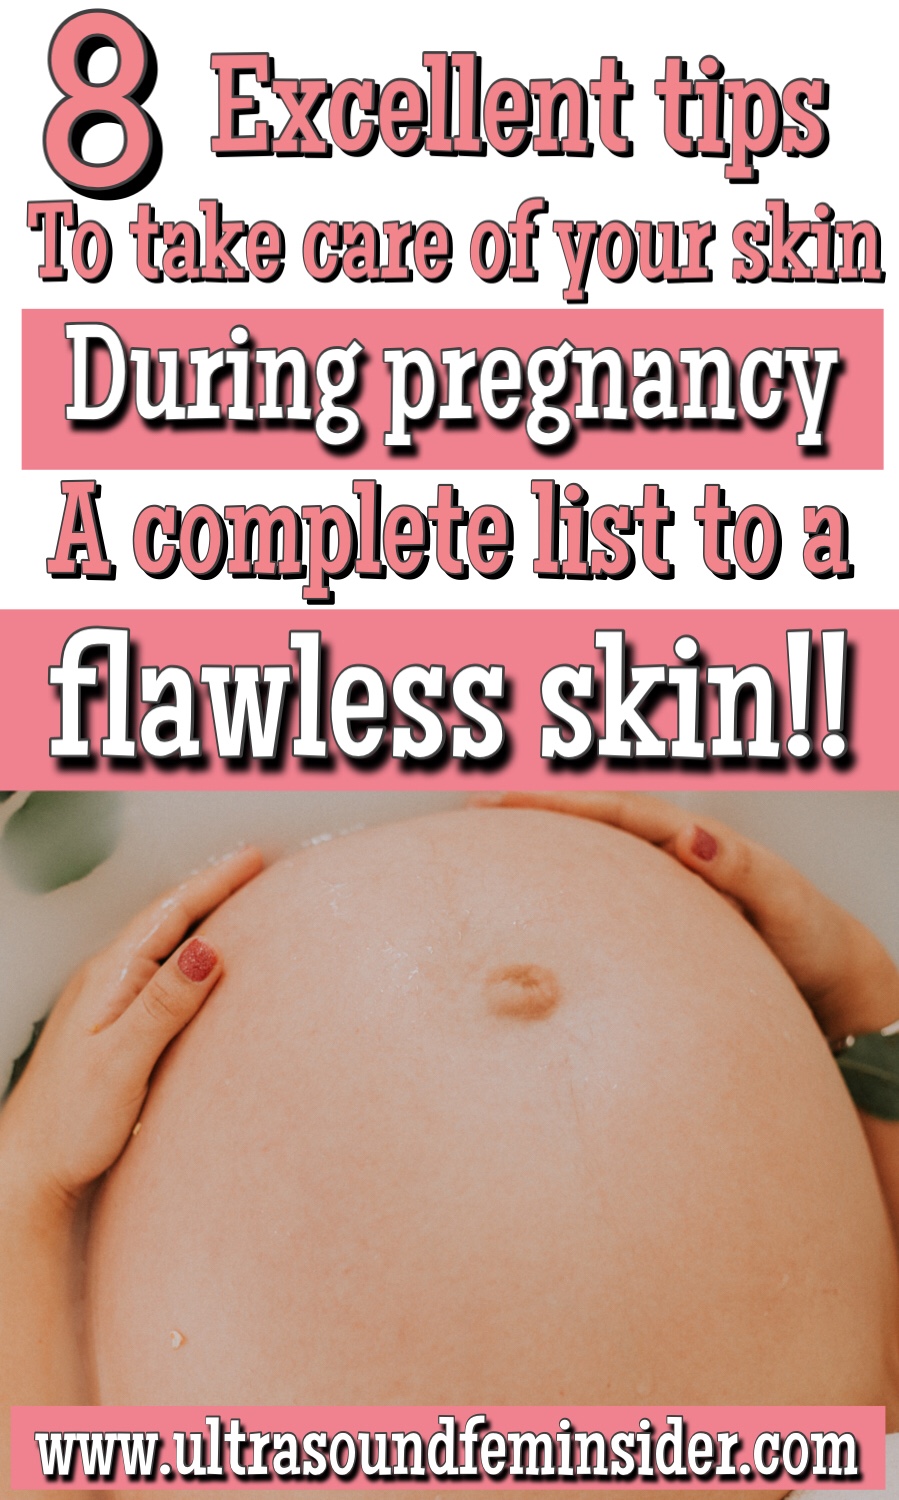 8 tips to a complete skin care during pregnancy 